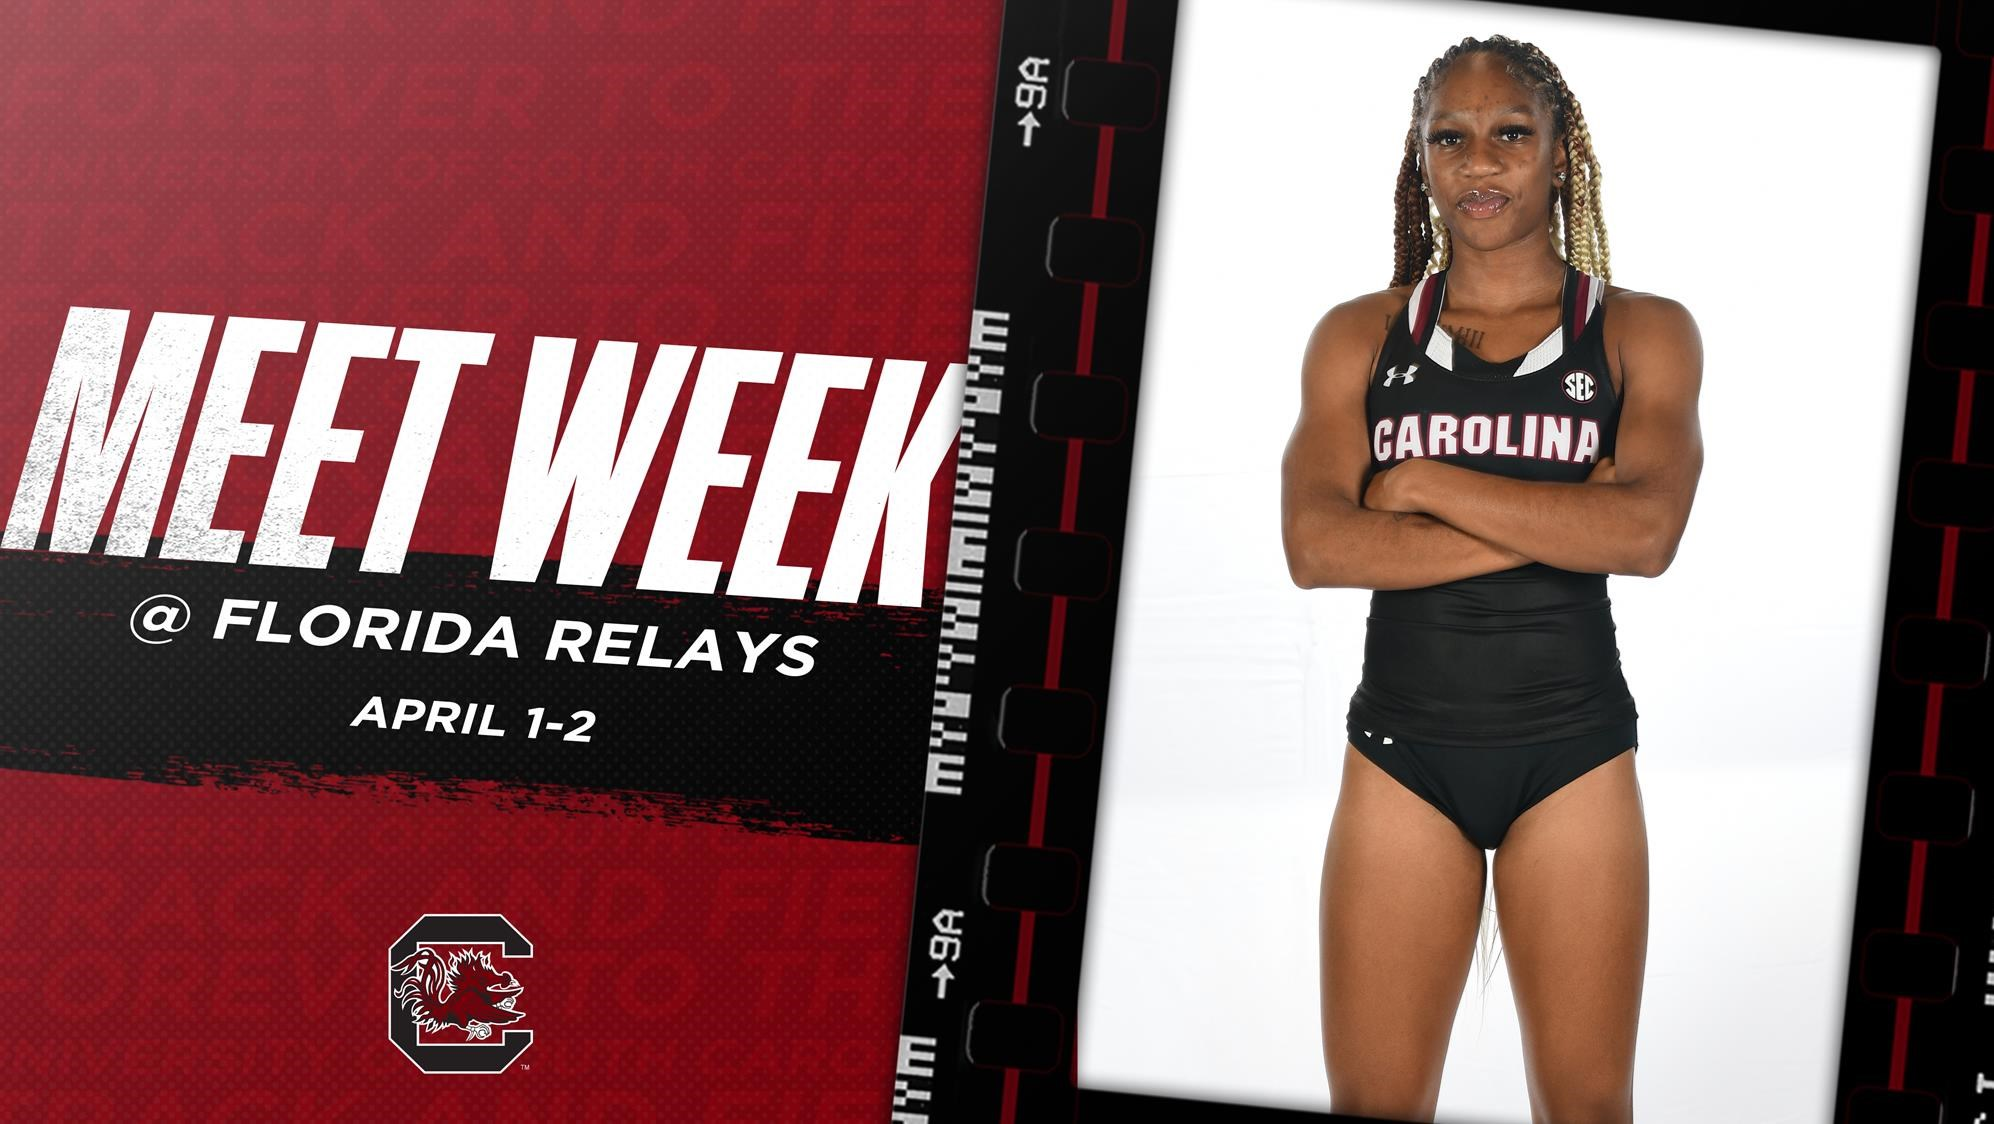 Gamecocks Join Nation's Best at Florida Relays